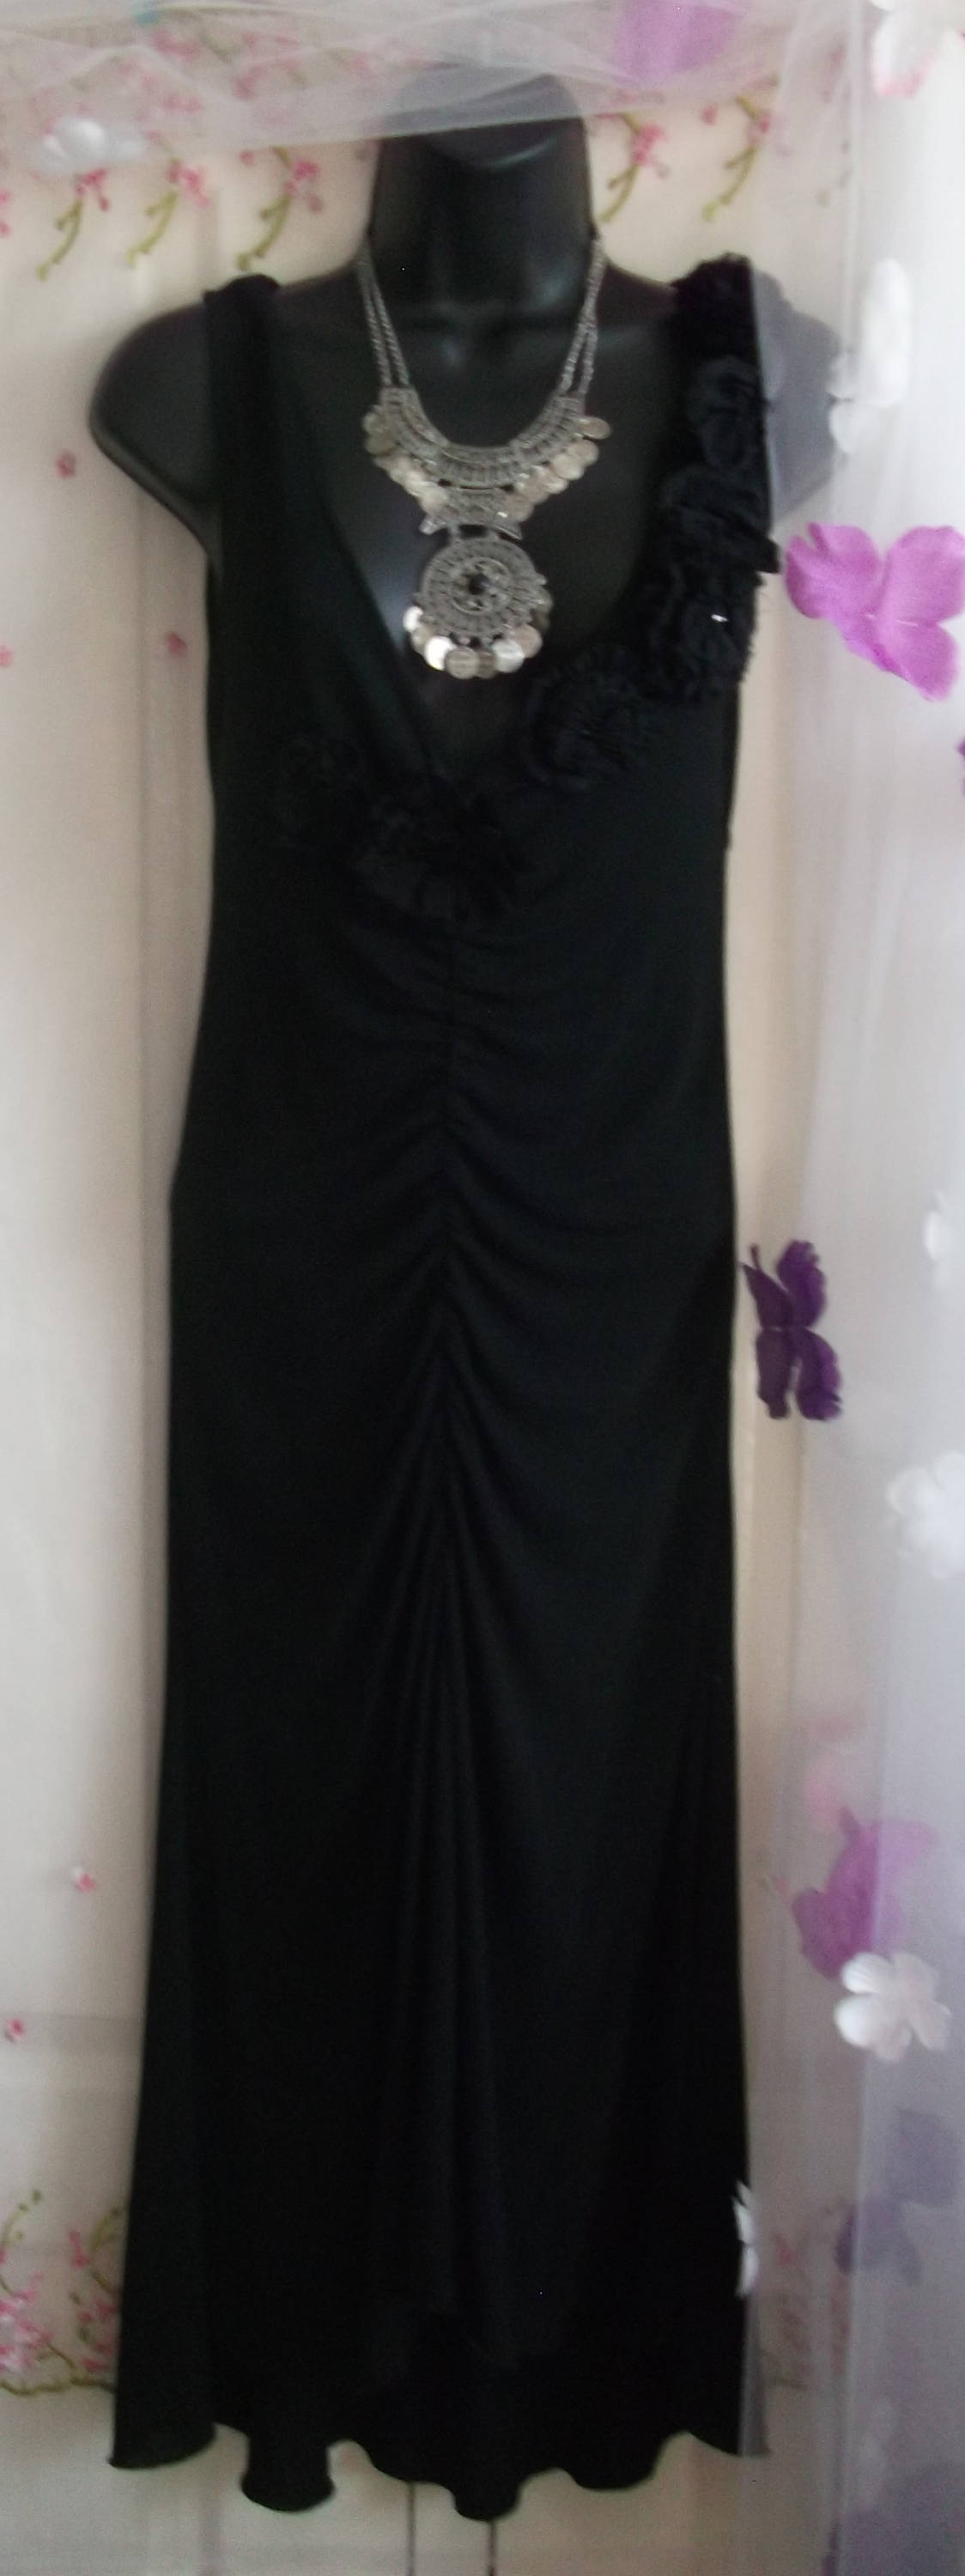 Gorgeous Black Dress By Moschino Cheap and Chic size 10, rose ruffle detail/plunging neckline Wonkey Donkey Bazaar